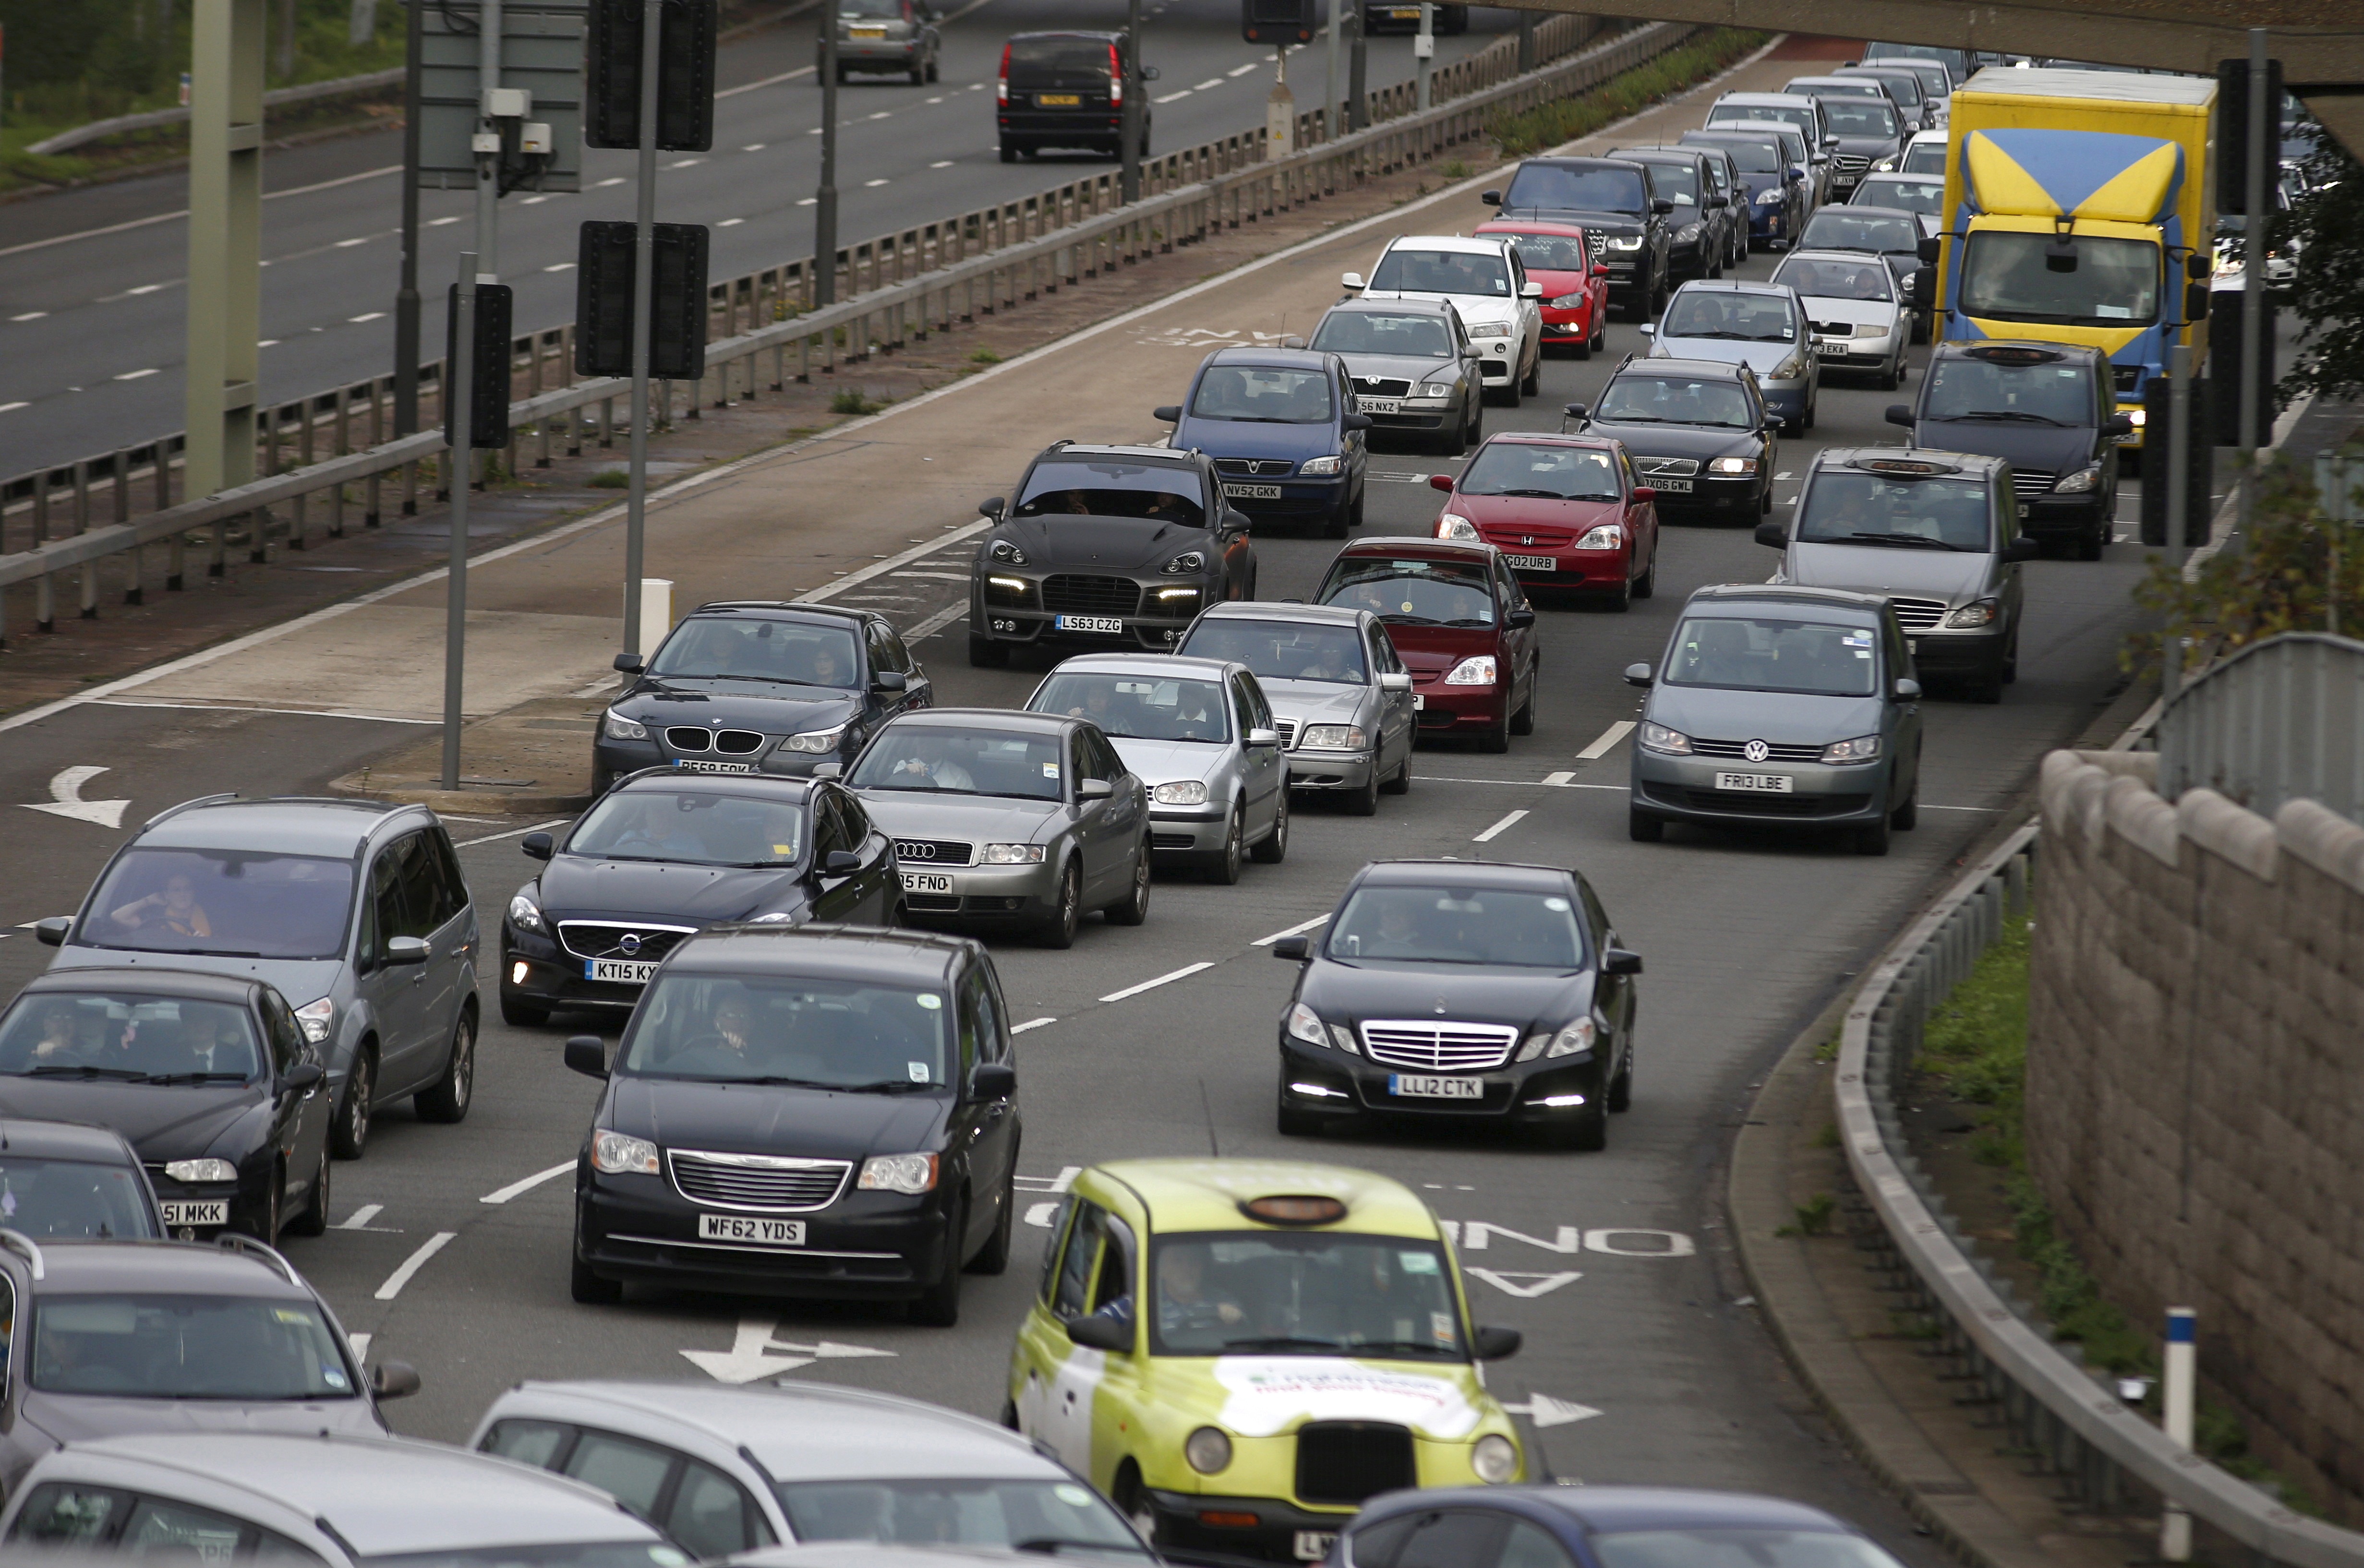 A traffic jam is seen as cars head towards the approach tunnel of Heathrow Airport, west London